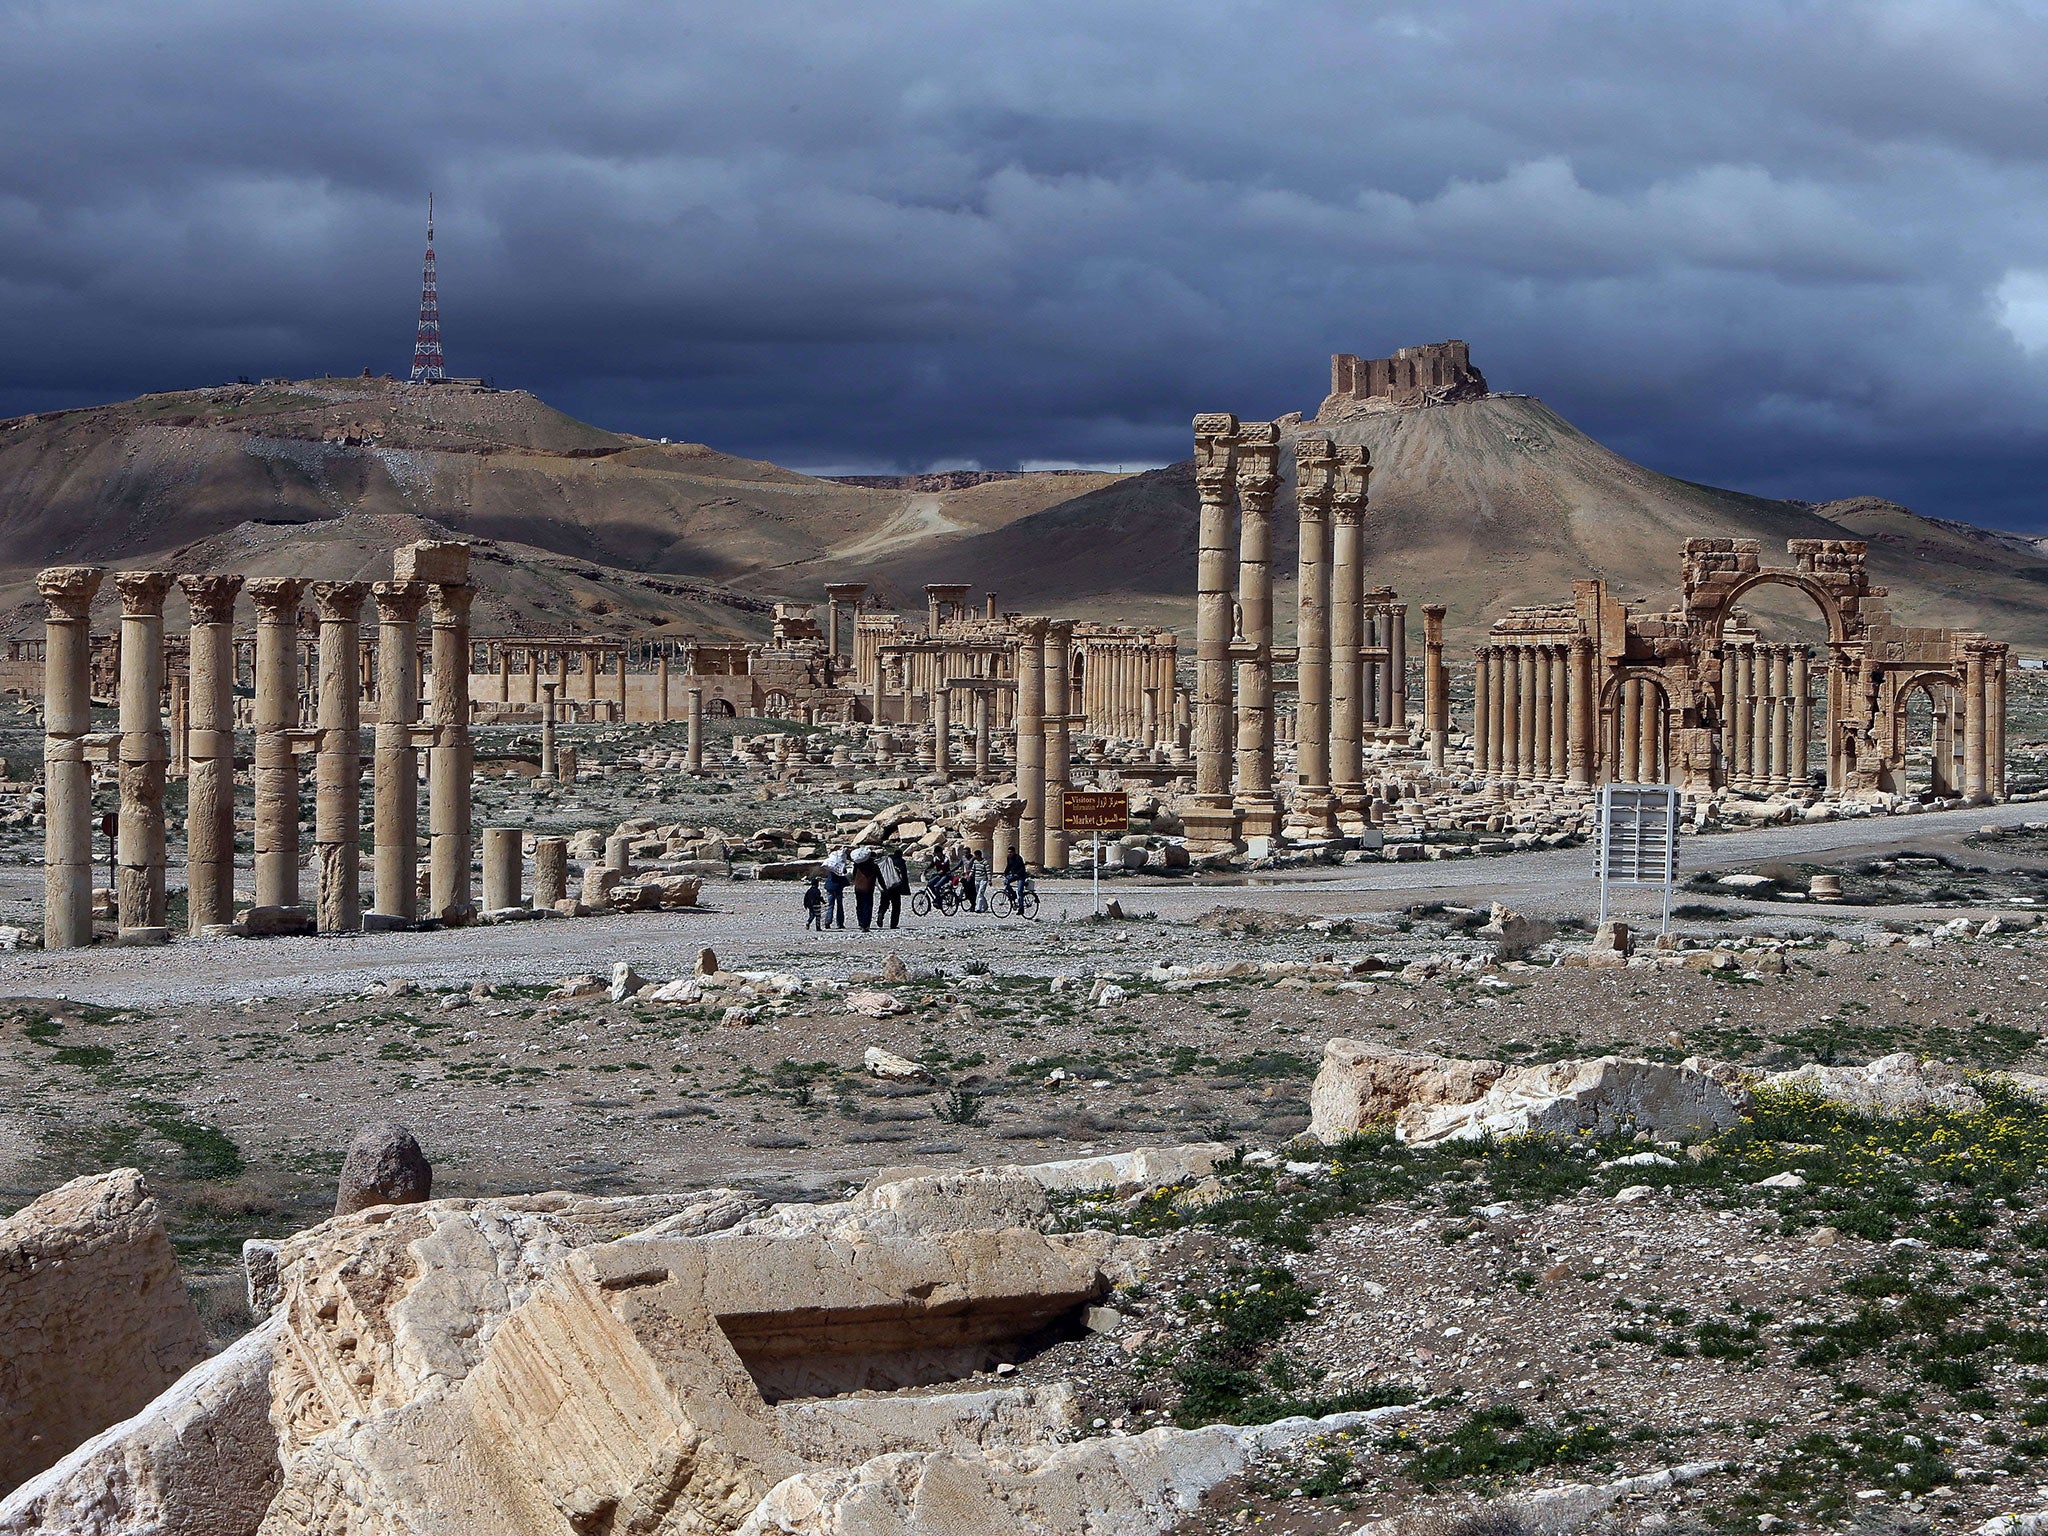 Isis seized the citadel and columns of Palmyra this week